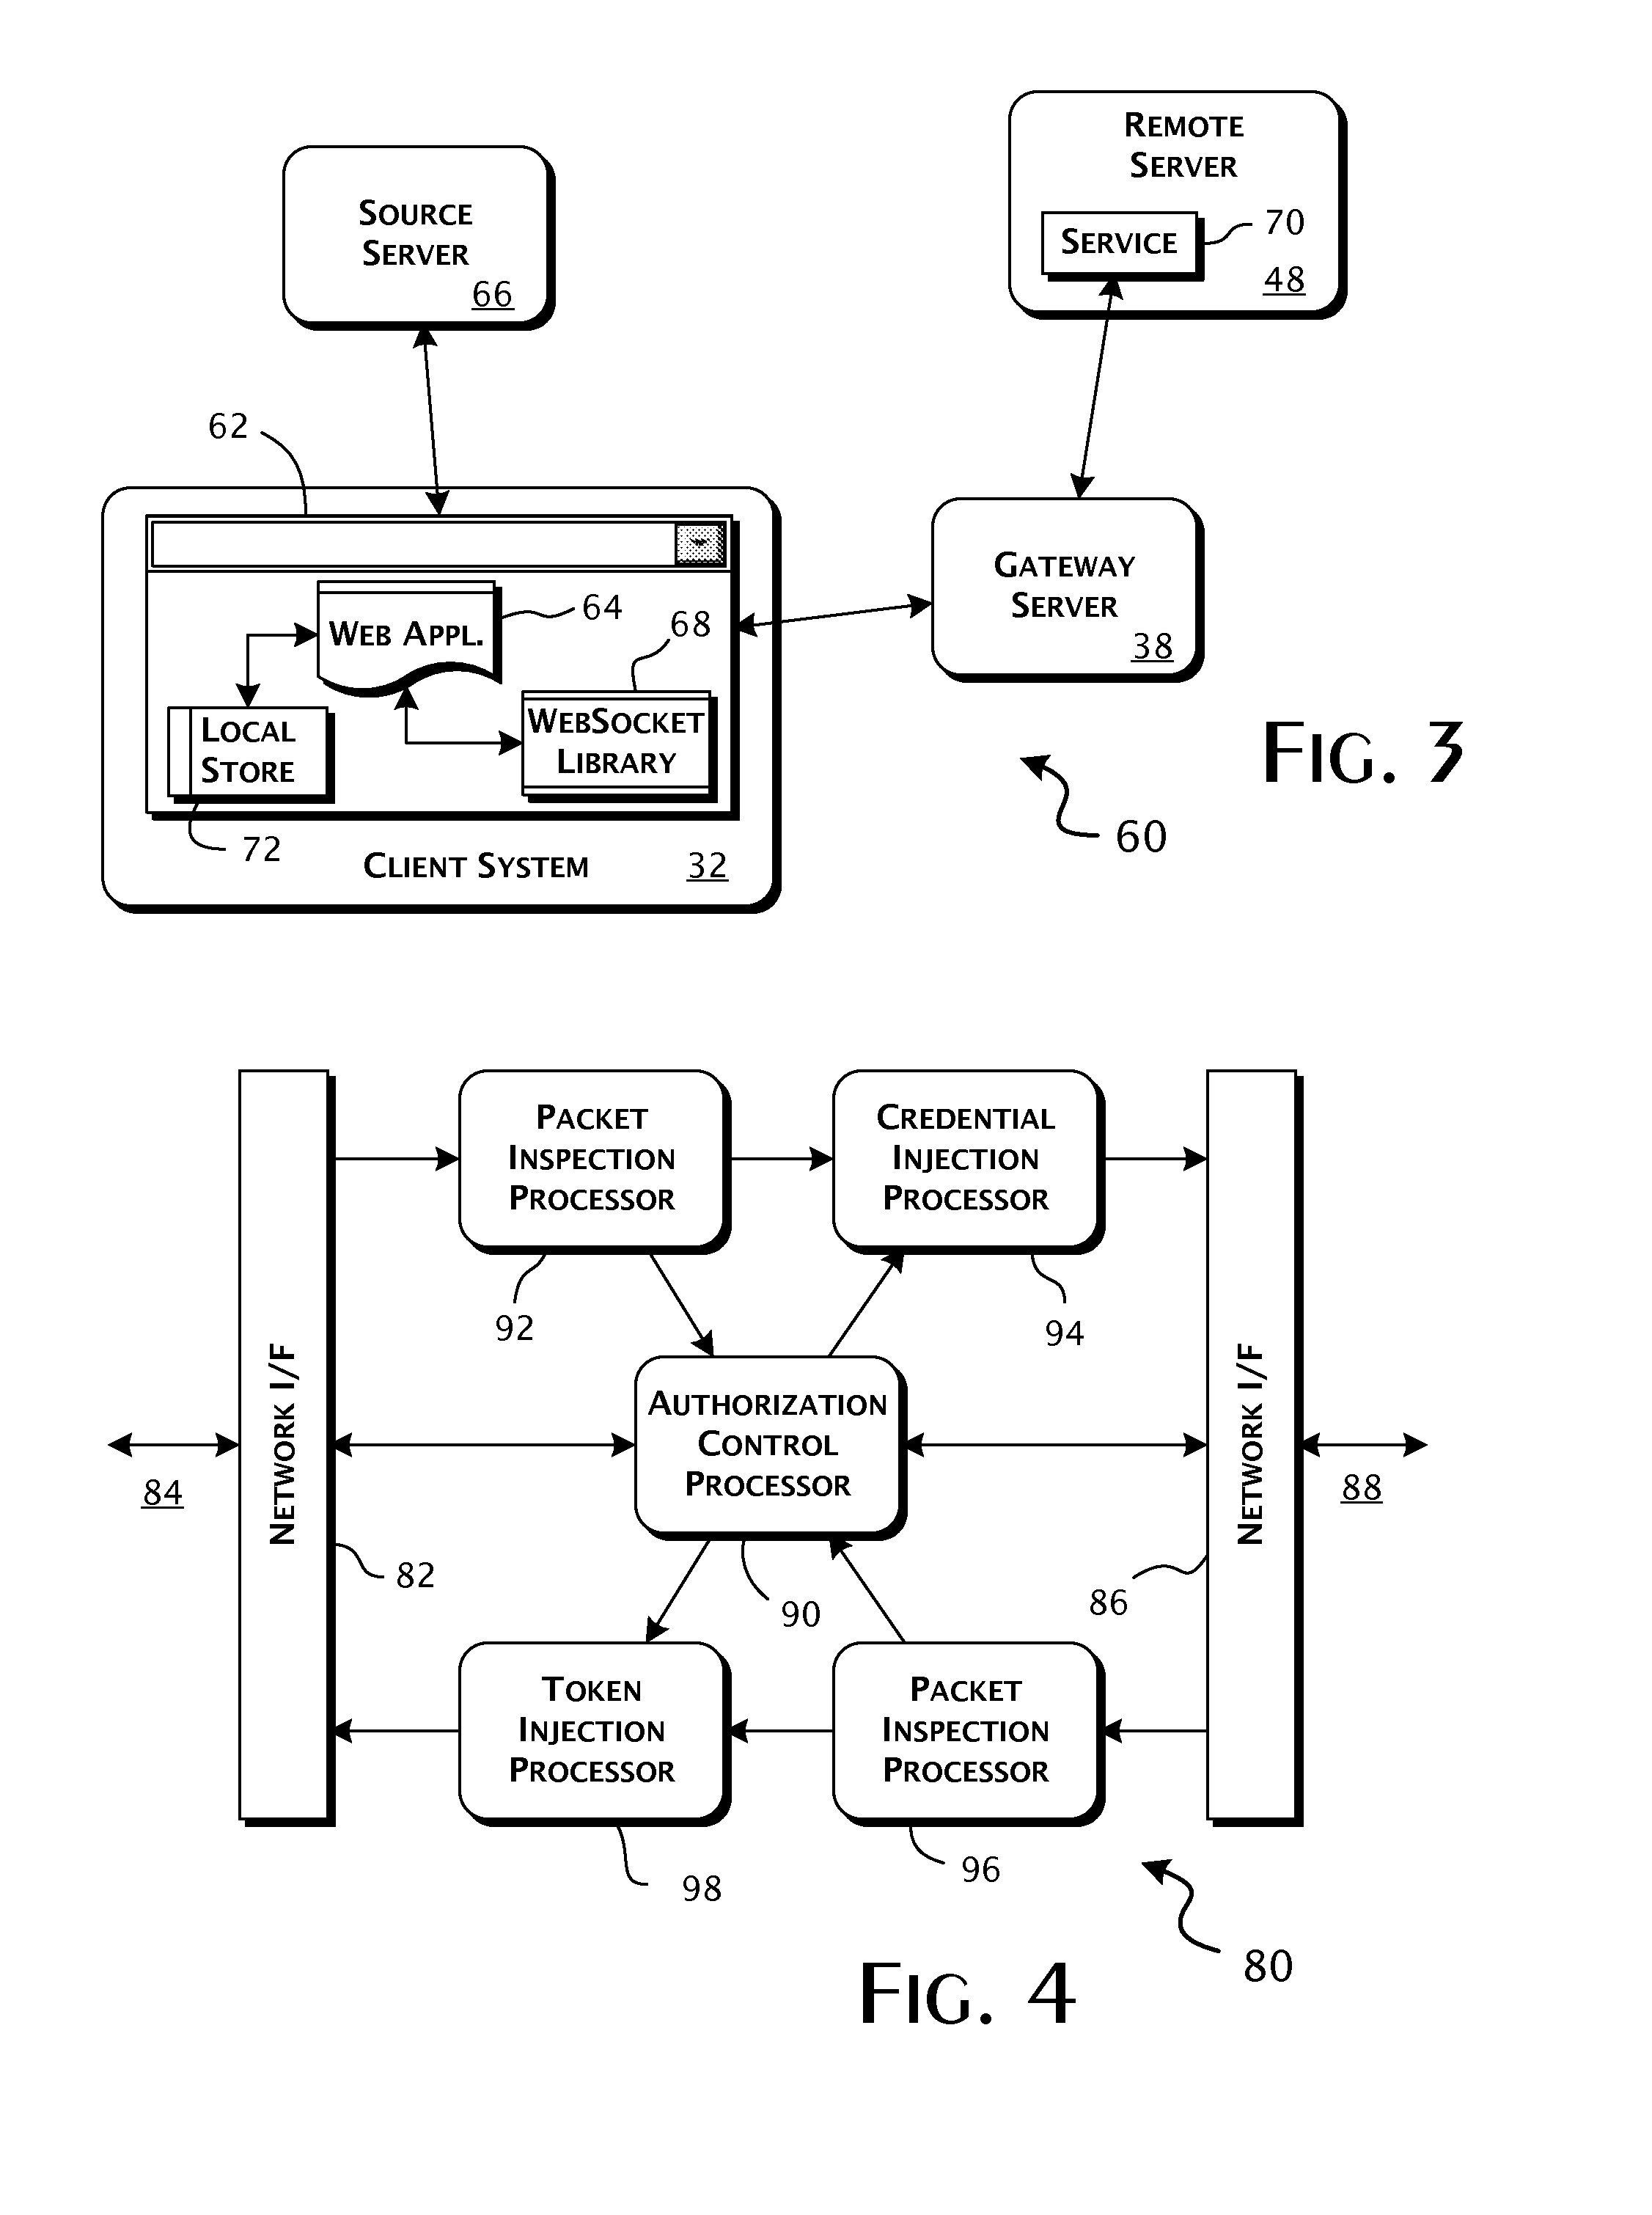 System and methods for providing stateless security management for web applications using non-HTTP communications protocols